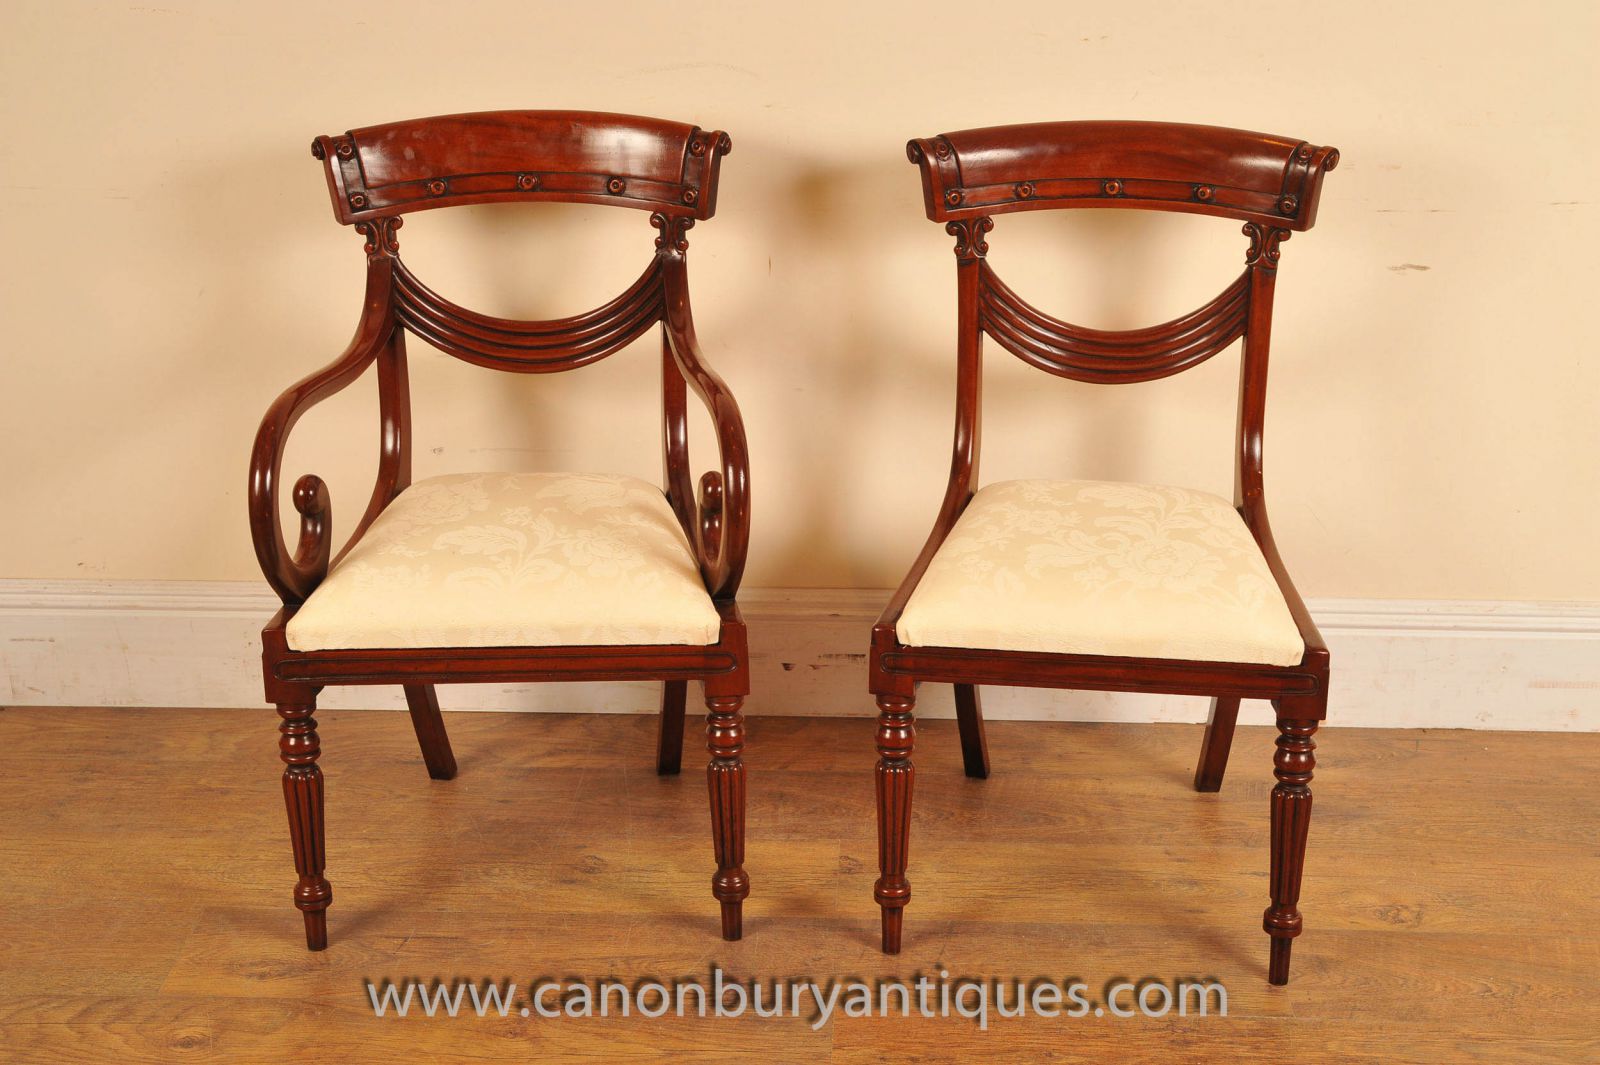 If you are looking for that classic Regency look these are the chairs you need